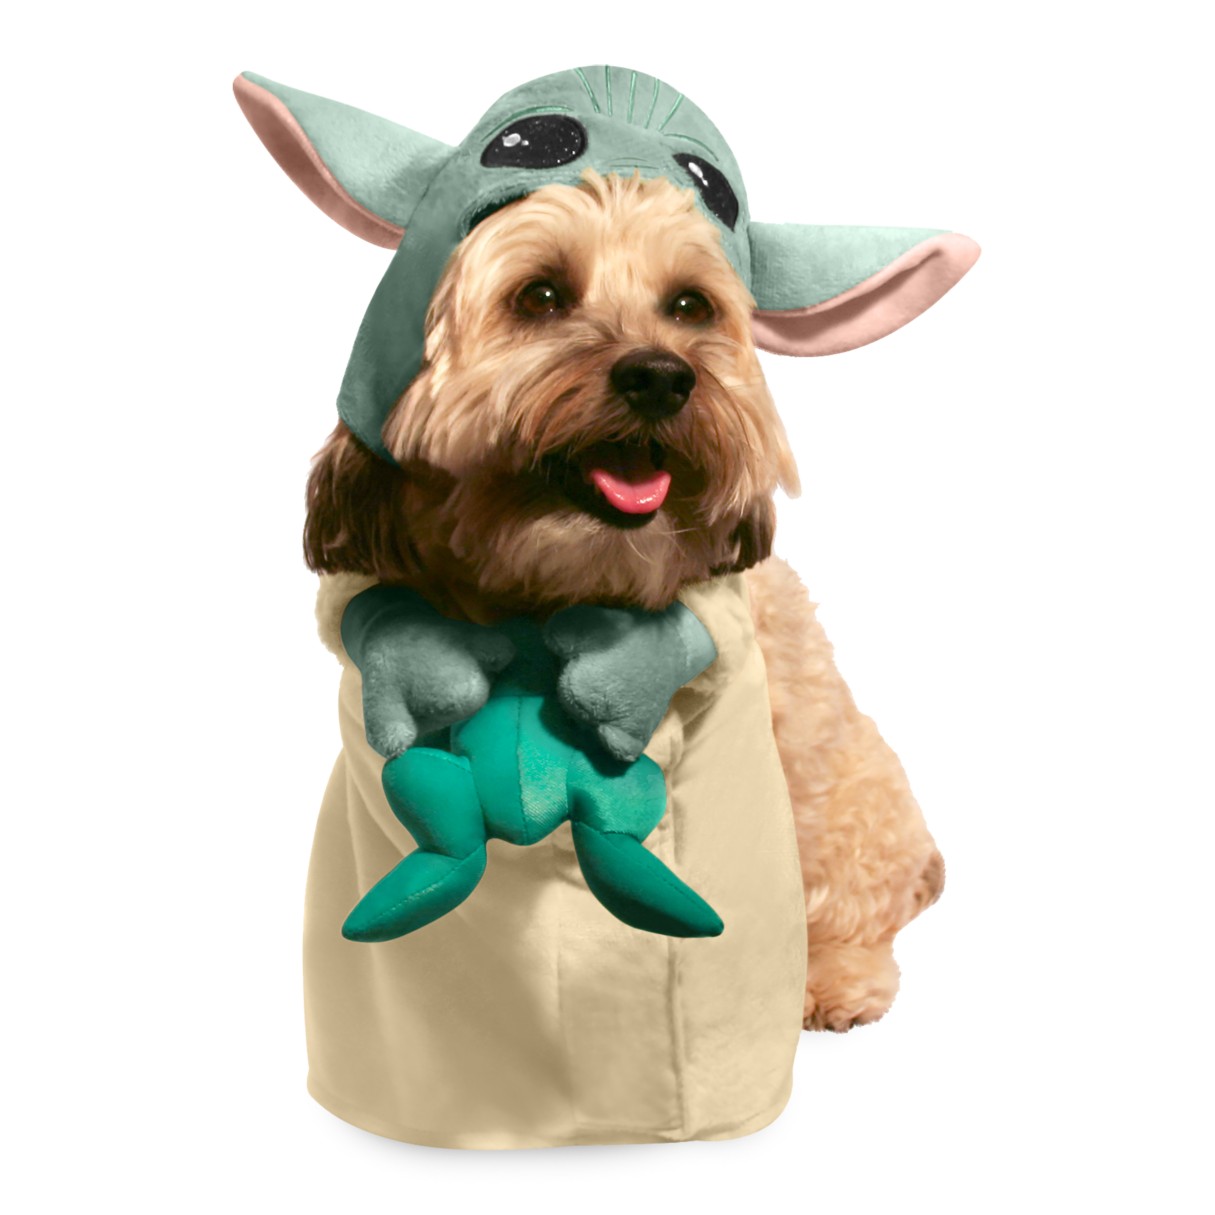 The Child Pet Costume by Rubie's – Star Wars: The Mandalorian